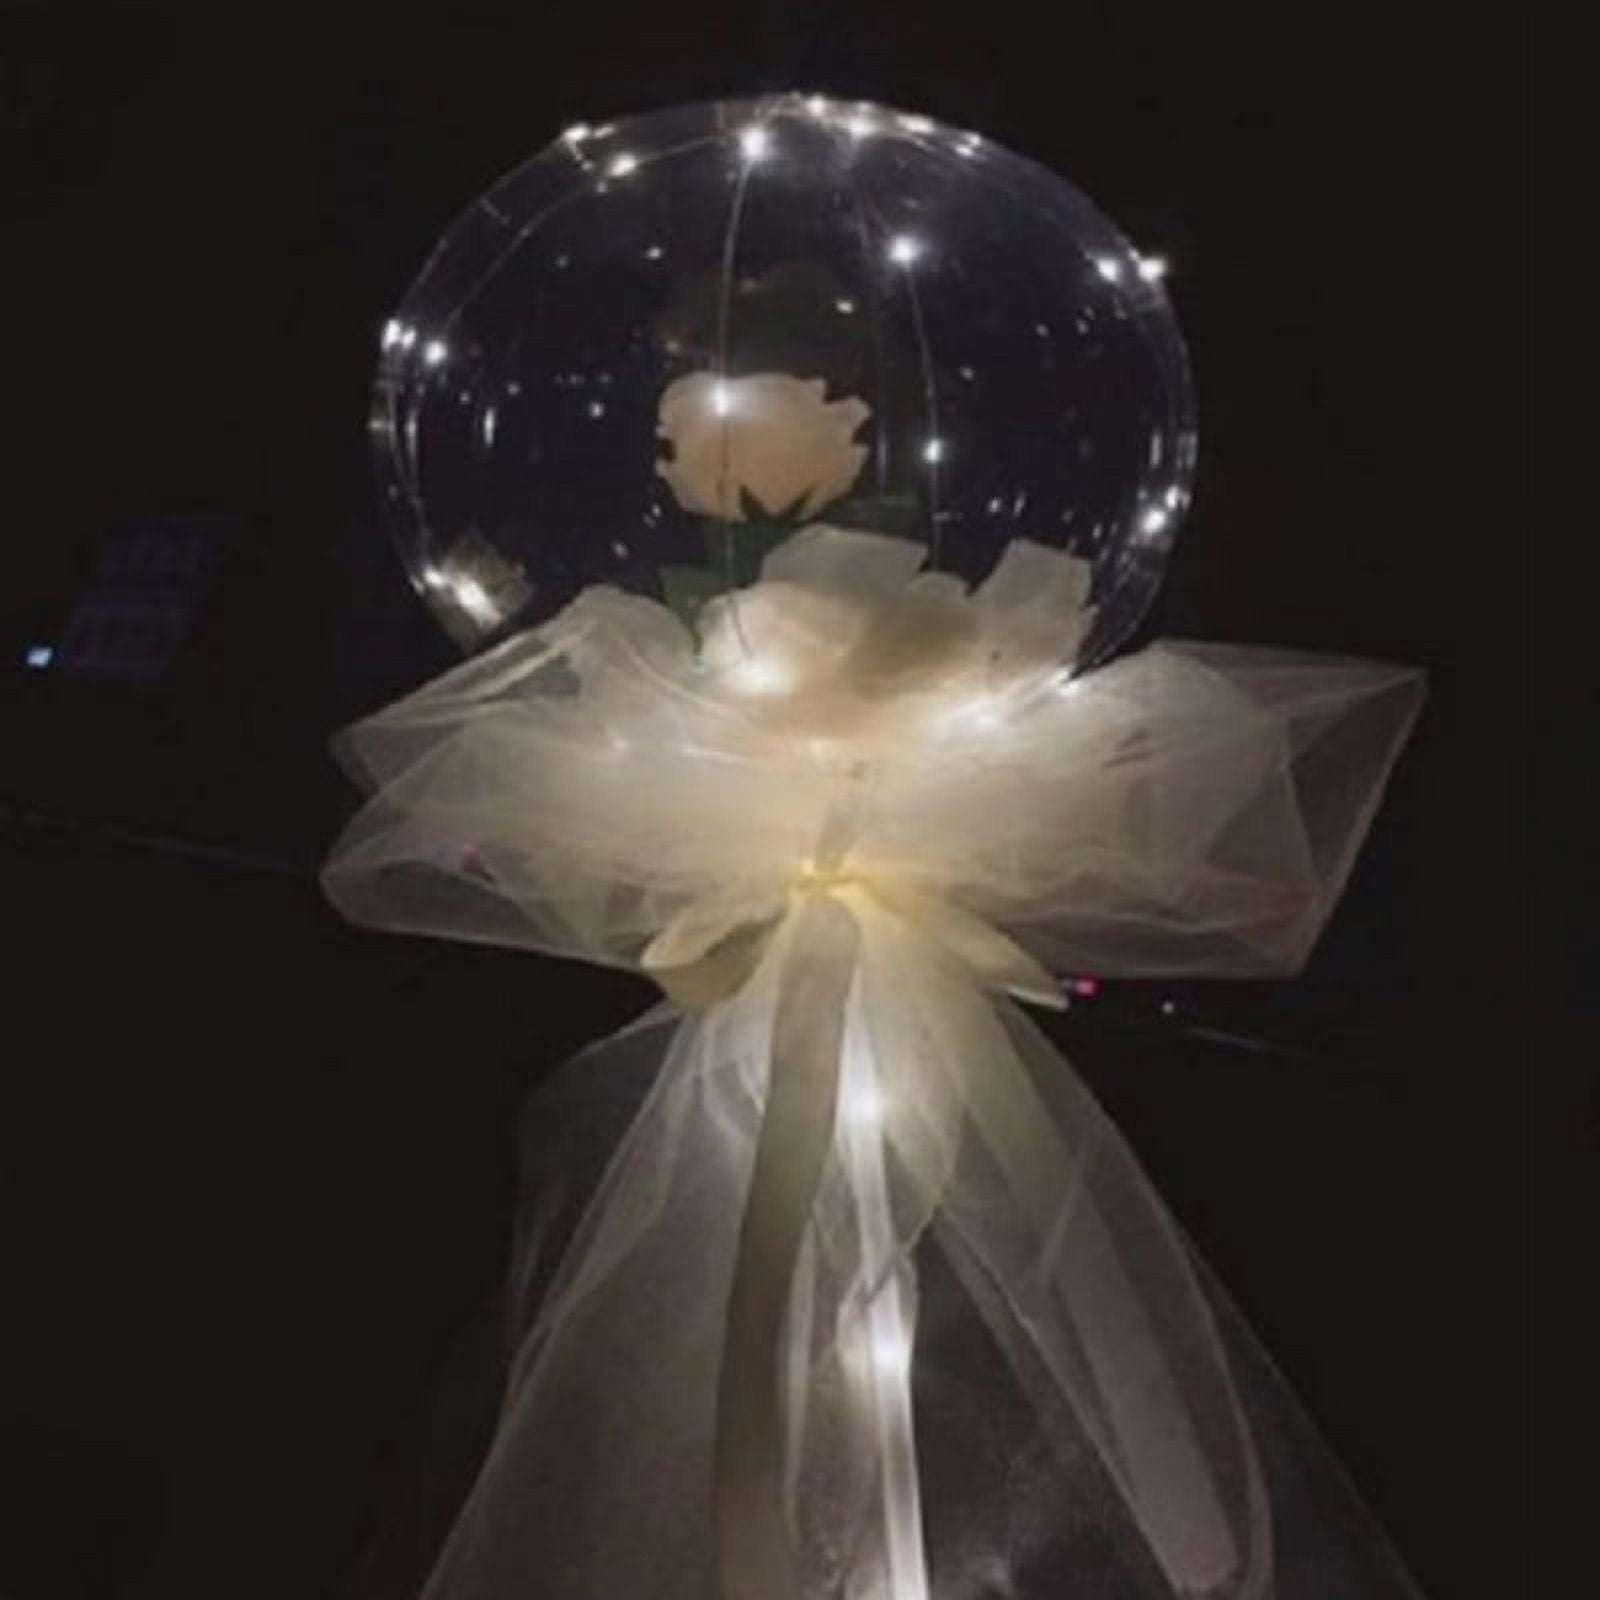 DIY Balloons With Lights Wholesale With Rose Flower Bouquet Birthday  Wedding Decoration Transparent Flowers Balls Luminous Bobo Balloon WLY  BH4647 From Besgohouseware, $3.75